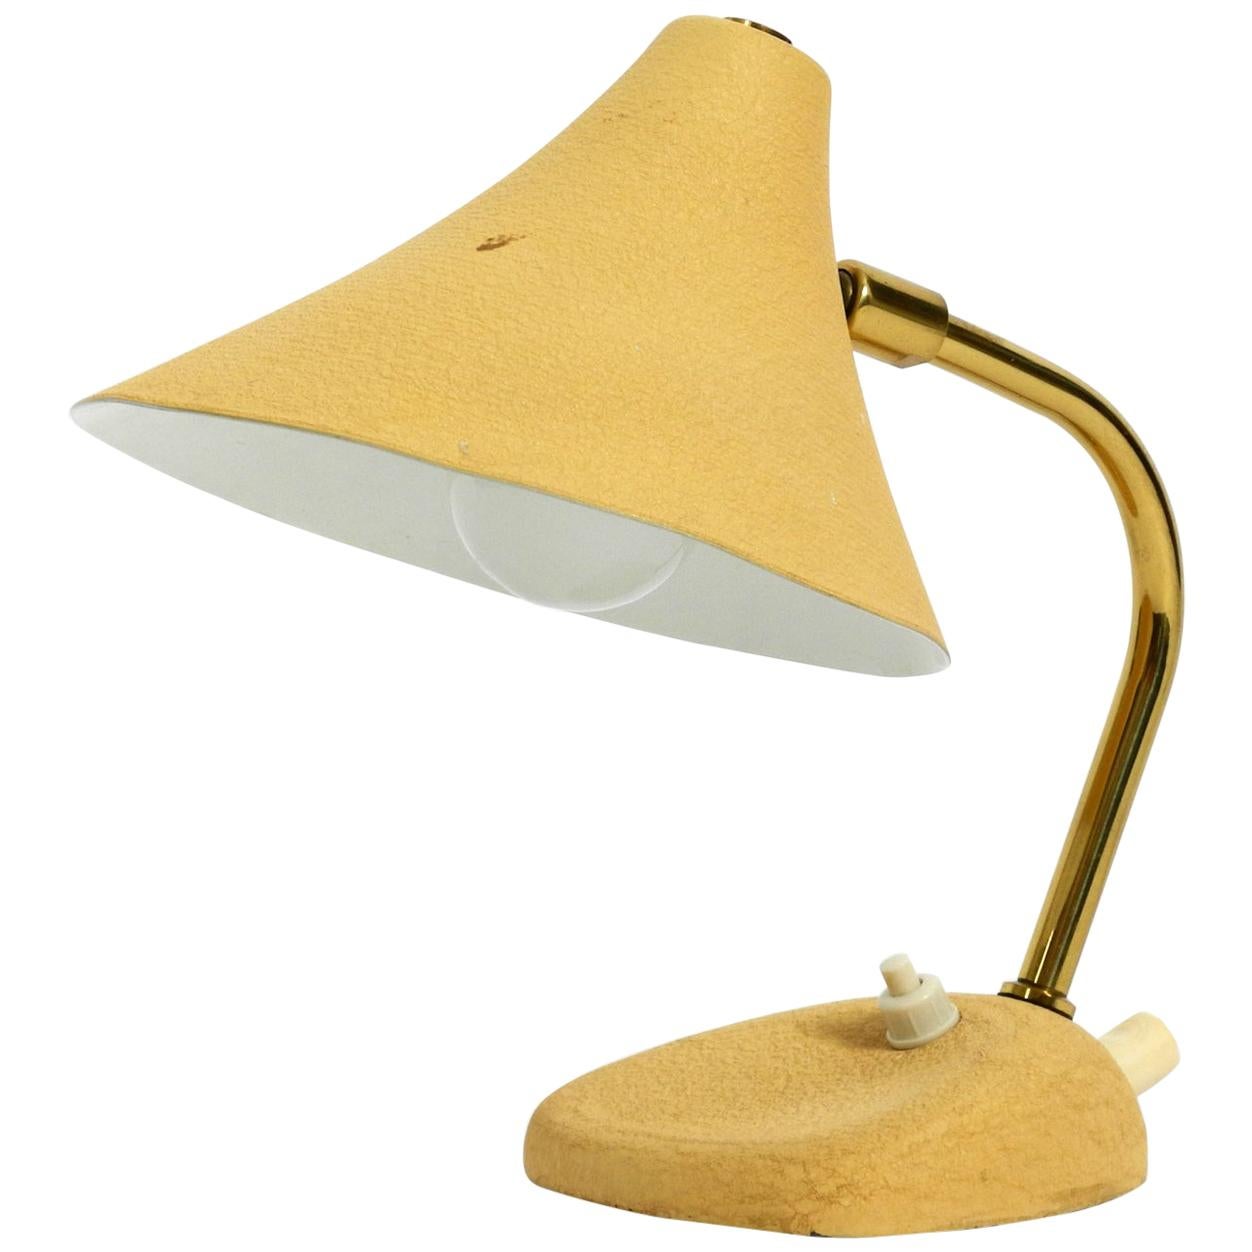 Small Midcentury Table Lamp with Beige Shrink Lacquer and Adjustable Shade